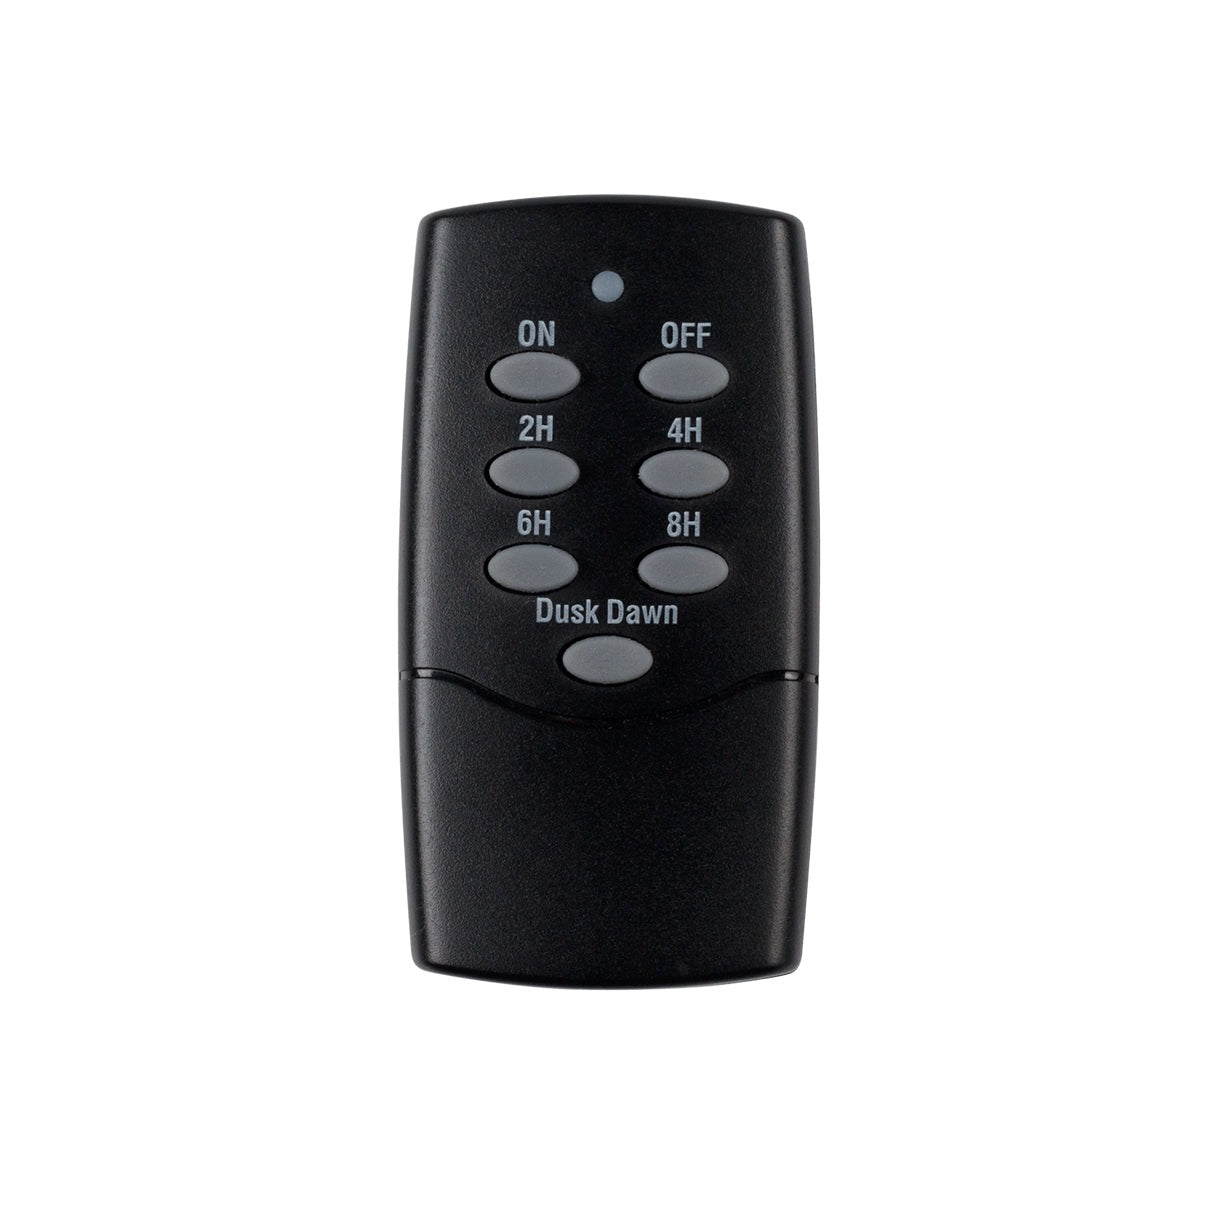 Replacement Wireless Remote Control Electrical Outlet BN-LINK - BN